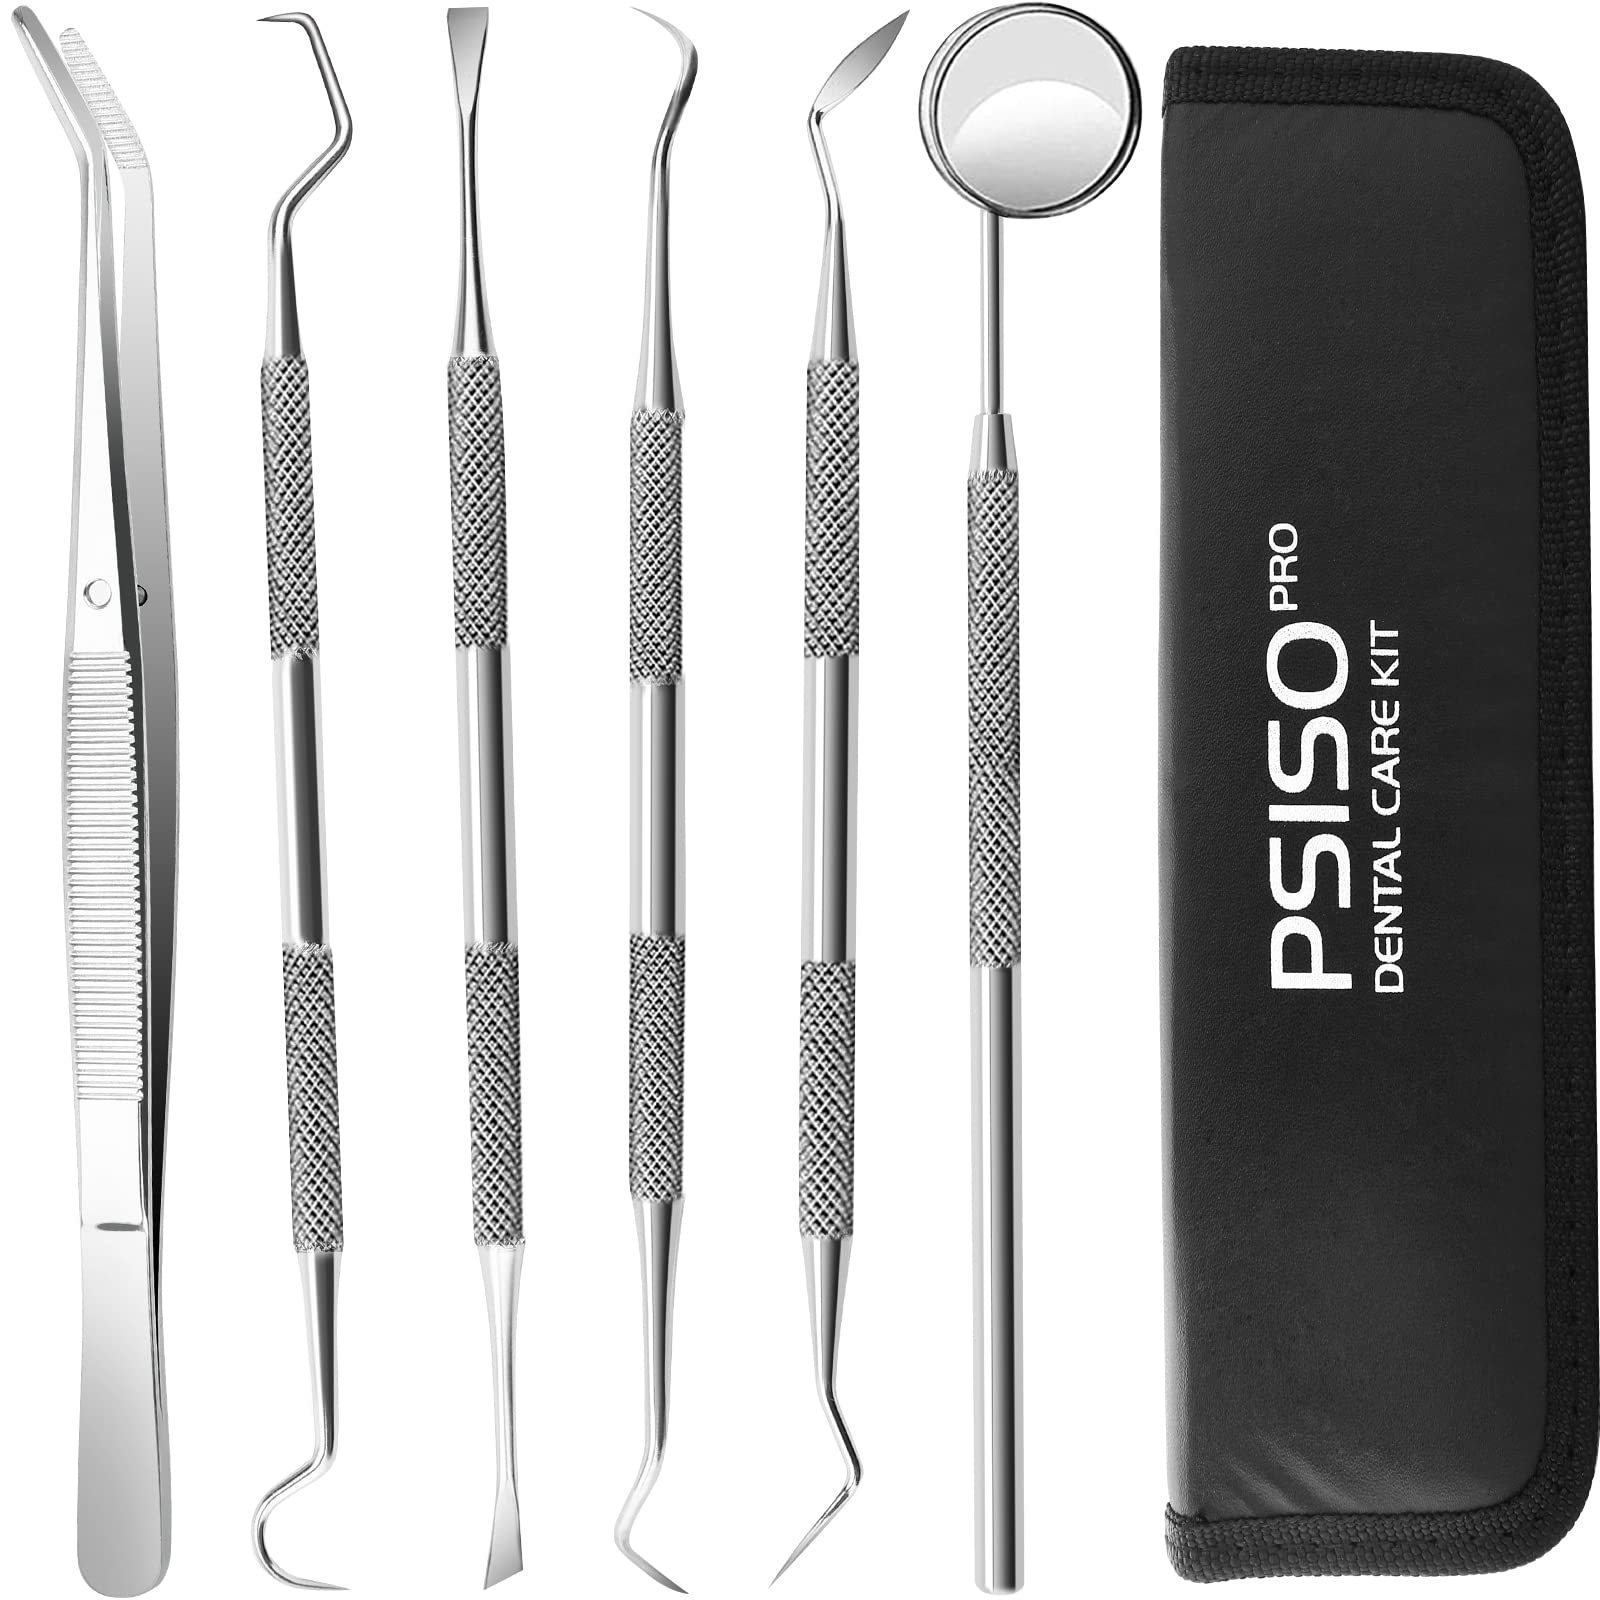 6 Pack Dental Tools, Professional Dentist Tool Hygiene Kit, Stainless Steel  Tooth Scraper Cleaning Plaque and Tartar Remover for Teeth, Dental Picks  Scaler Oral Care Tools Set (with Case) 6 Pack Dental